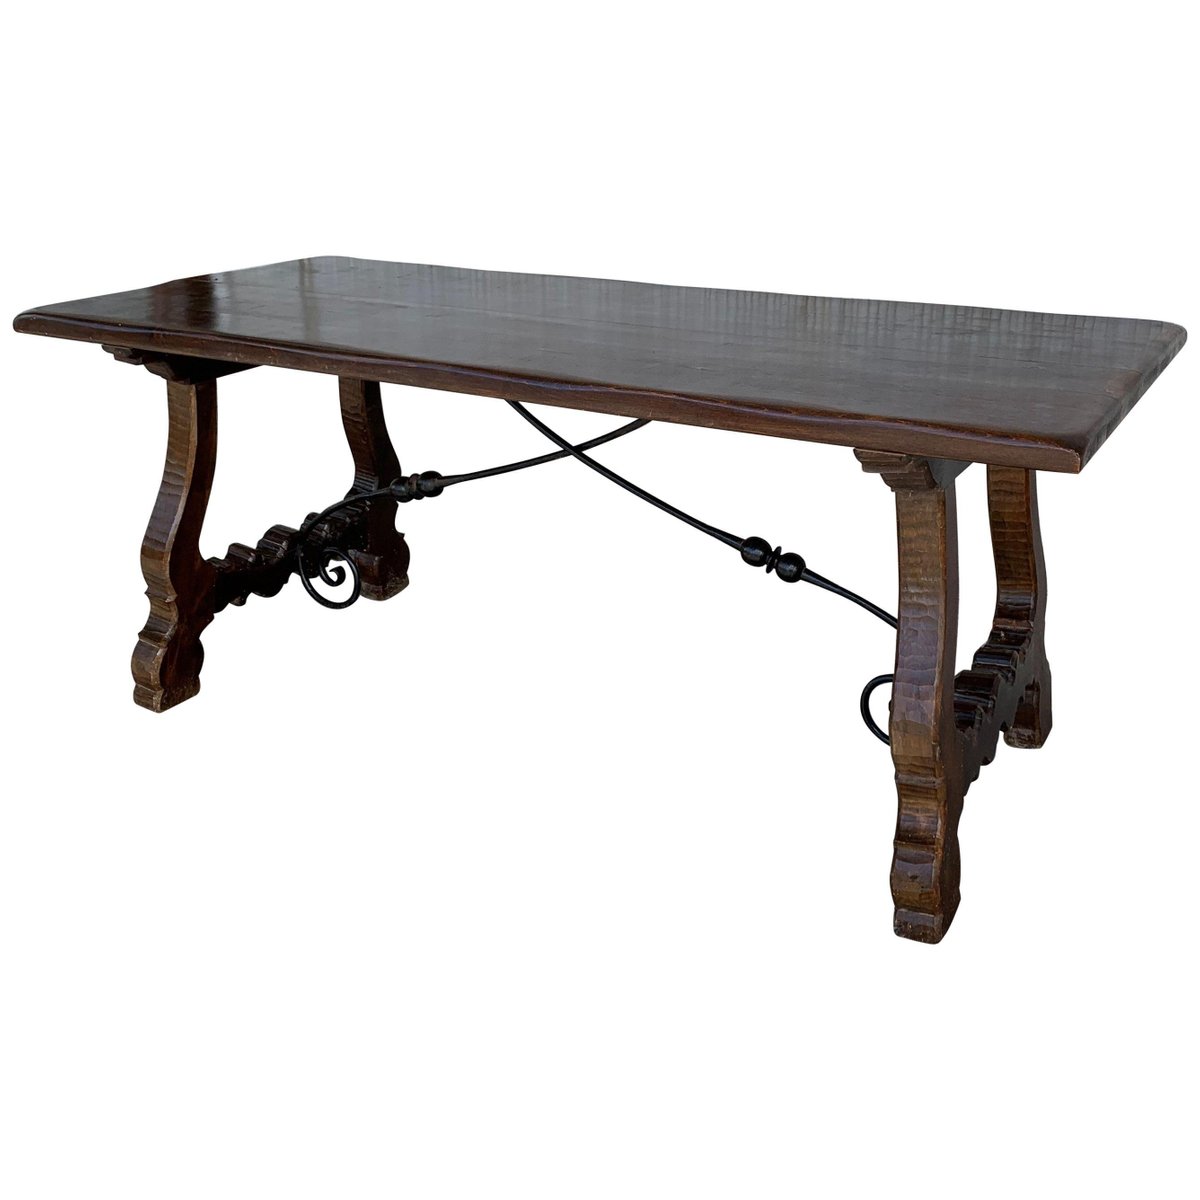 20th century refectory spanish table with lyre legs and iron stretch PSK-1002534